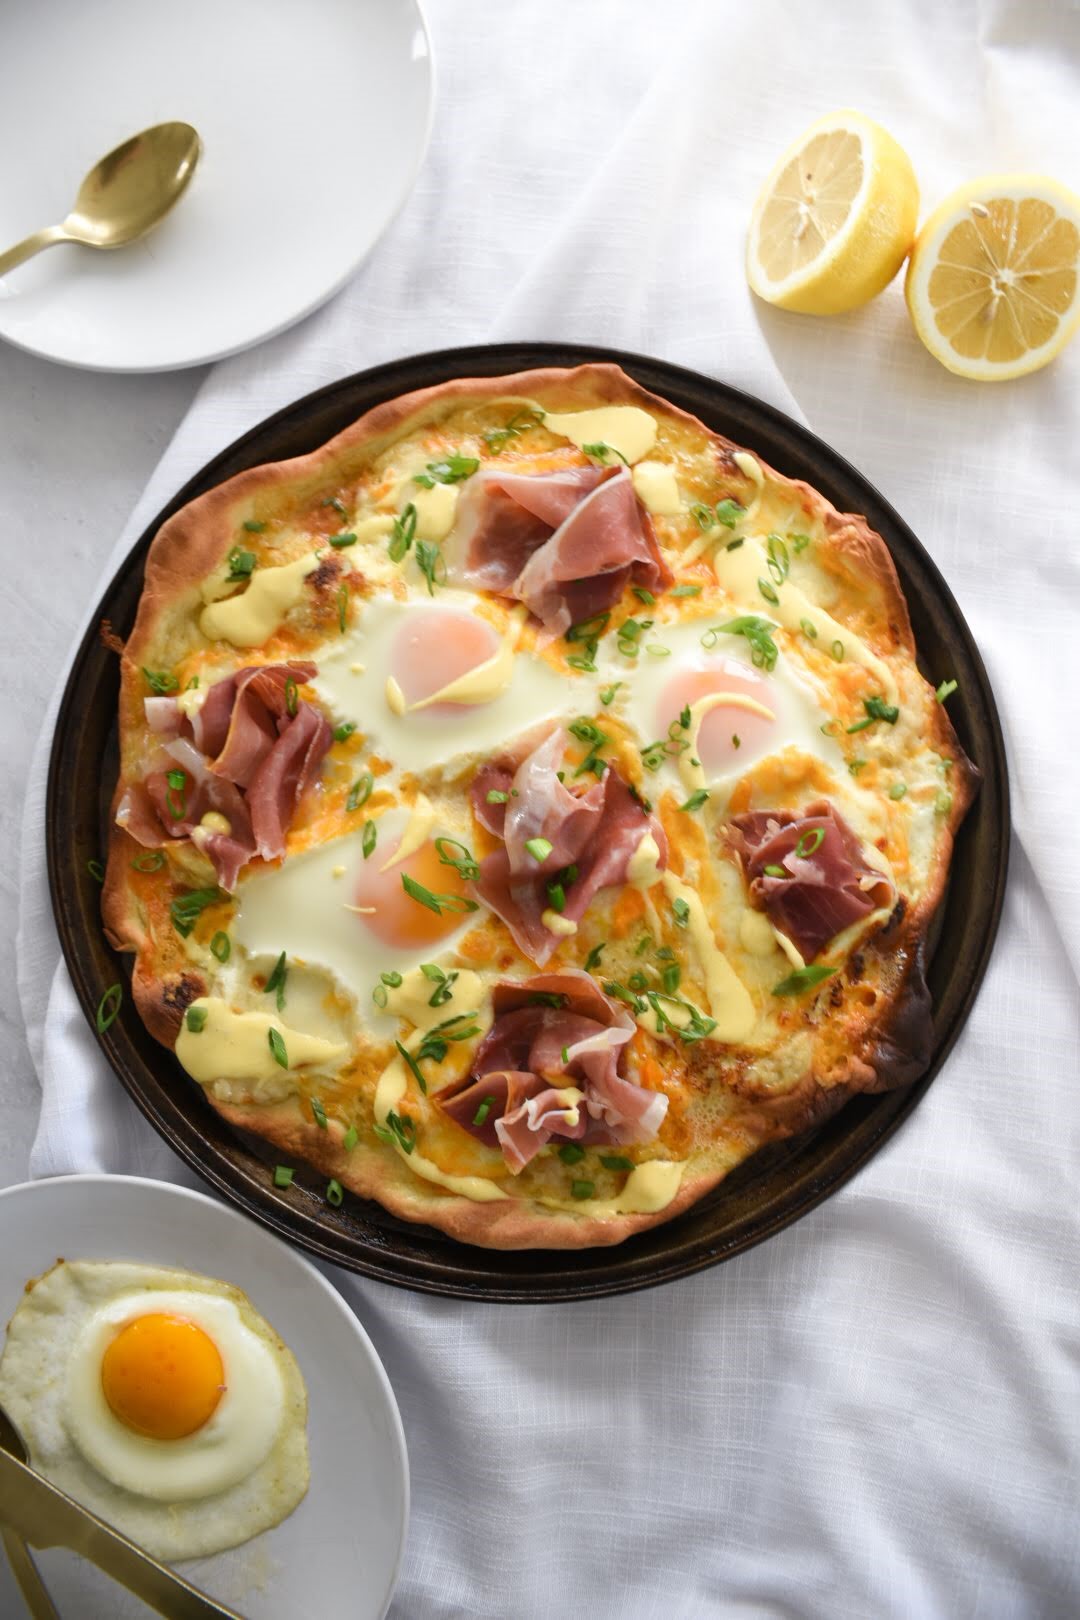 Breakfast Pizza Recipe For The Kids - Save-On-Foods